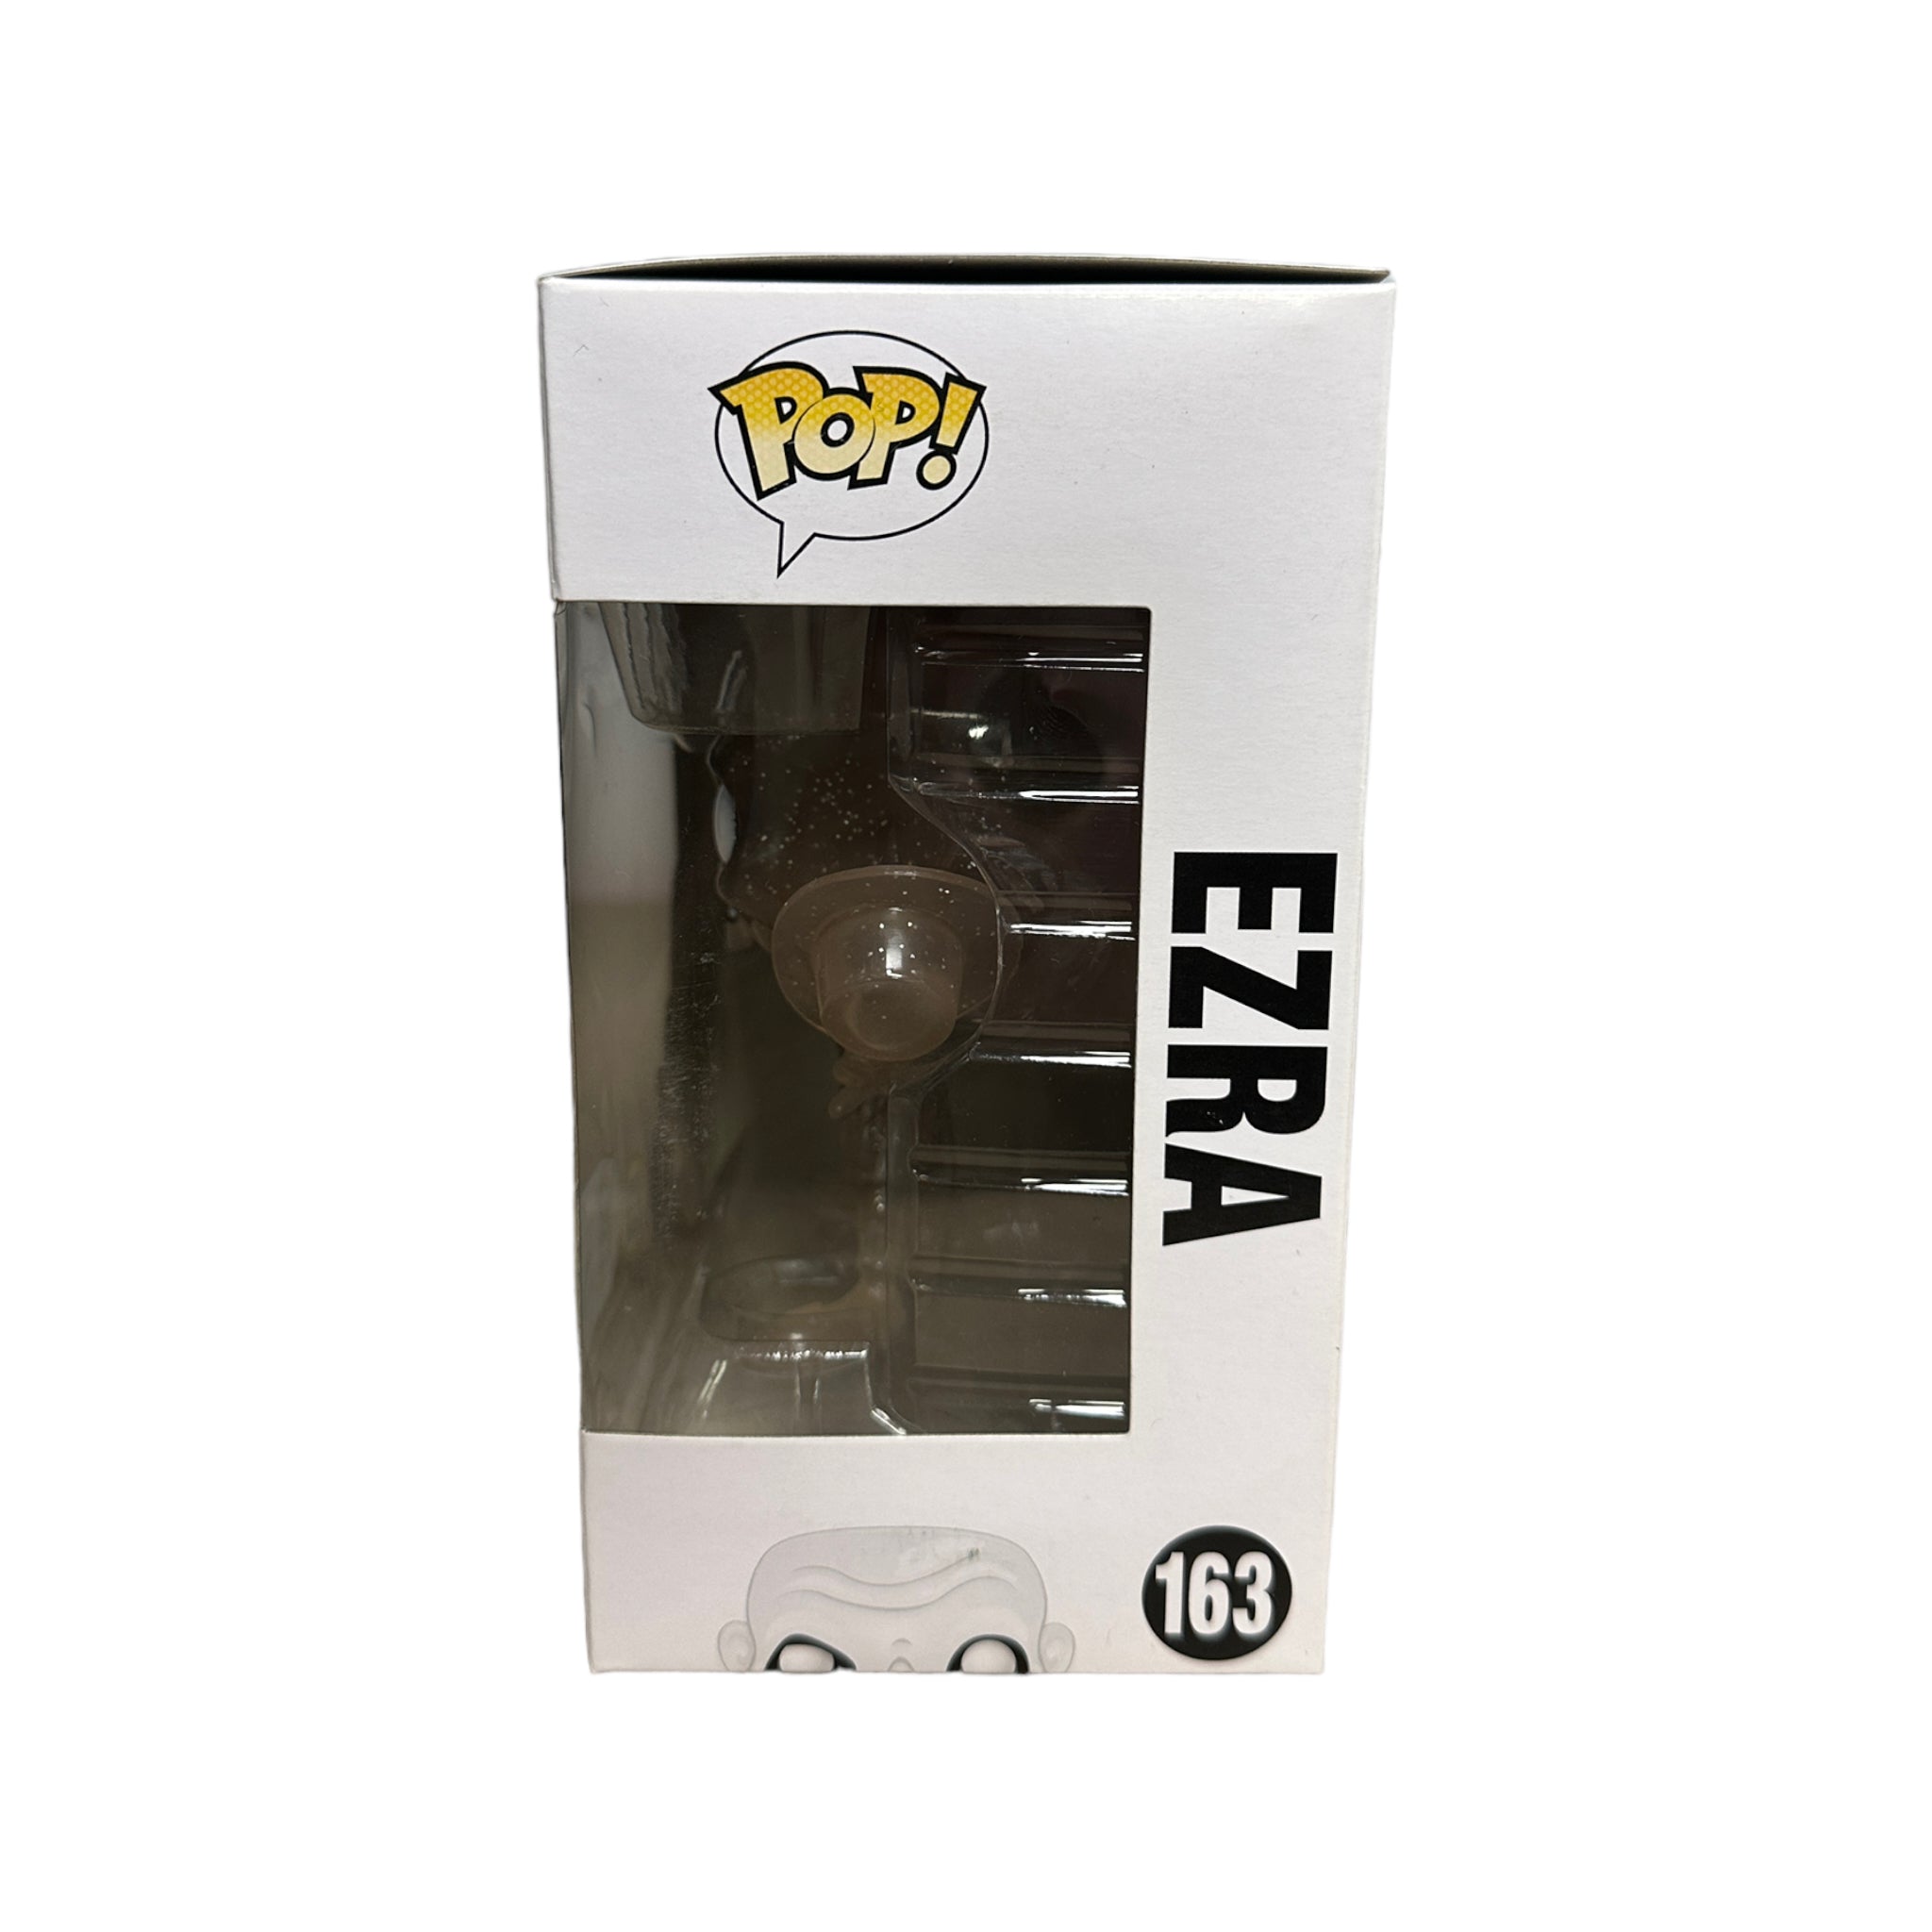 Ezra #163 (Glows in the Dark) Funko Pop! - The Haunted Mansion - SDCC 2016 Exclusive LE1000 Pcs - Condition 7.5/10